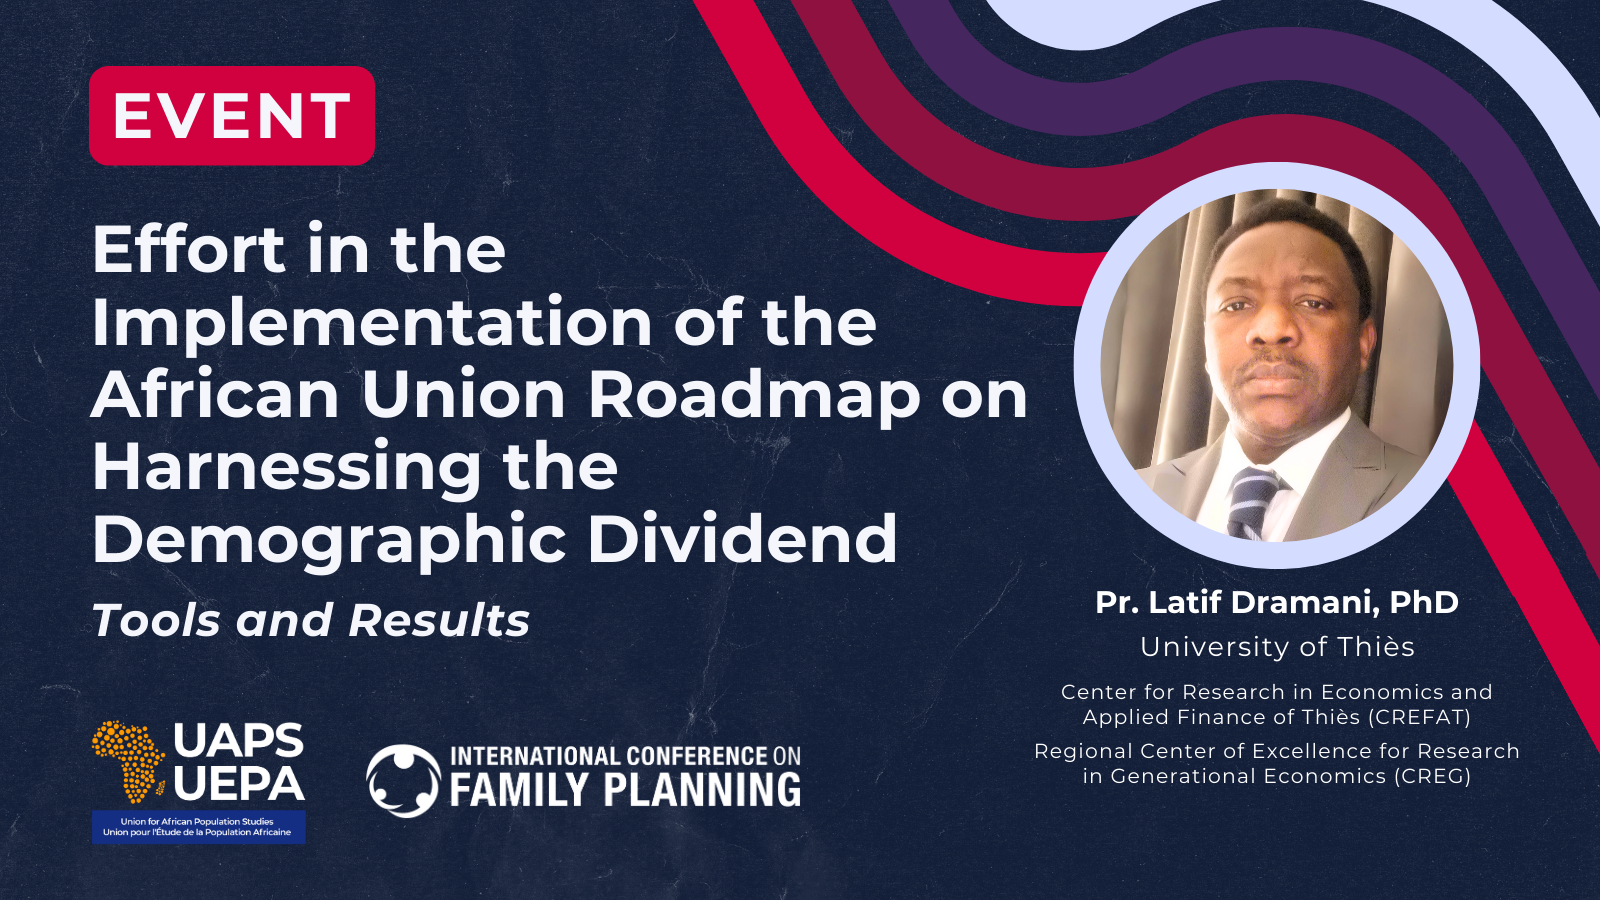 REGISTER NOW: Effort in the Implementation of the African Union Roadmap on Harnessing Demographic Dividend